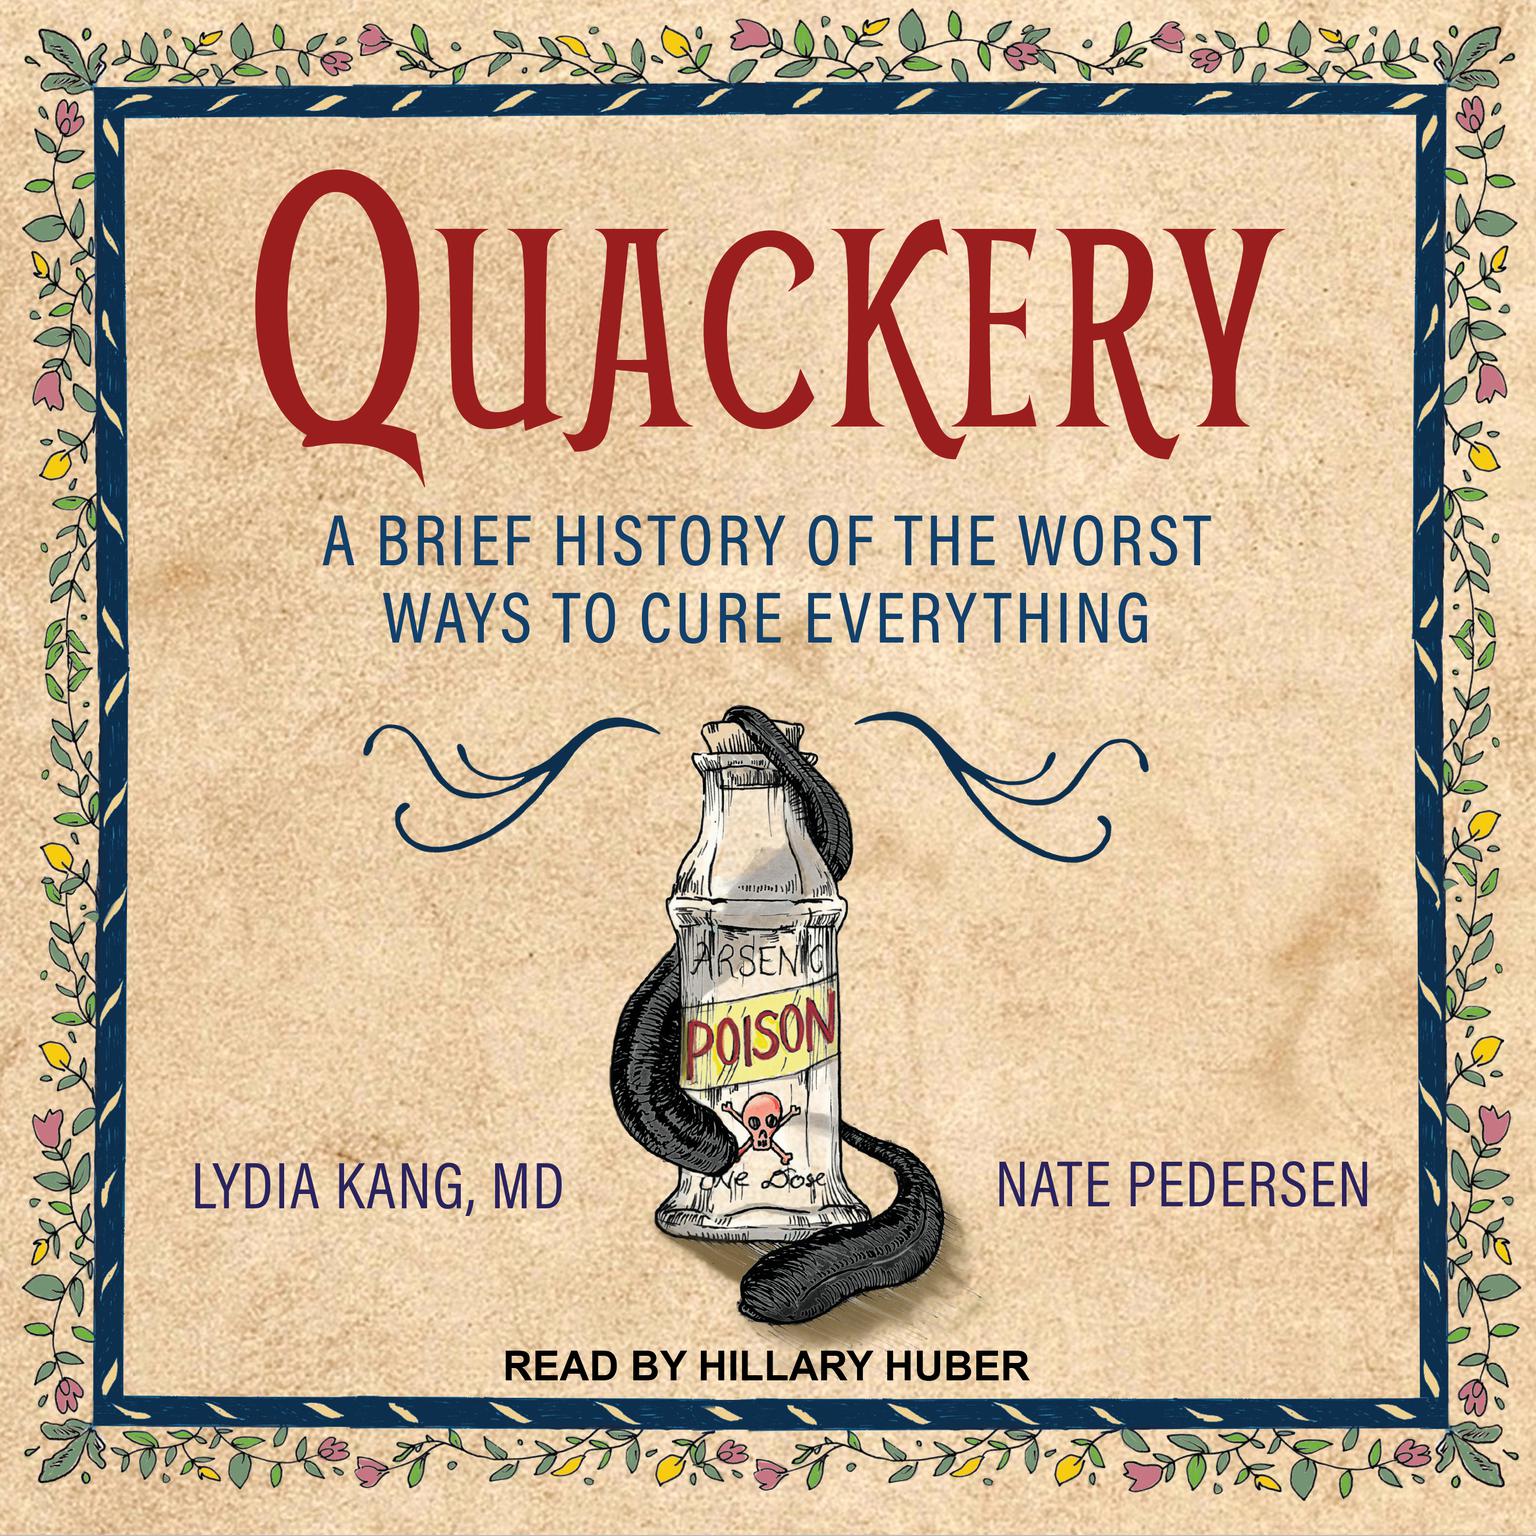 Quackery: A Brief History of the Worst Ways to Cure Everything Audiobook, by Lydia Kang